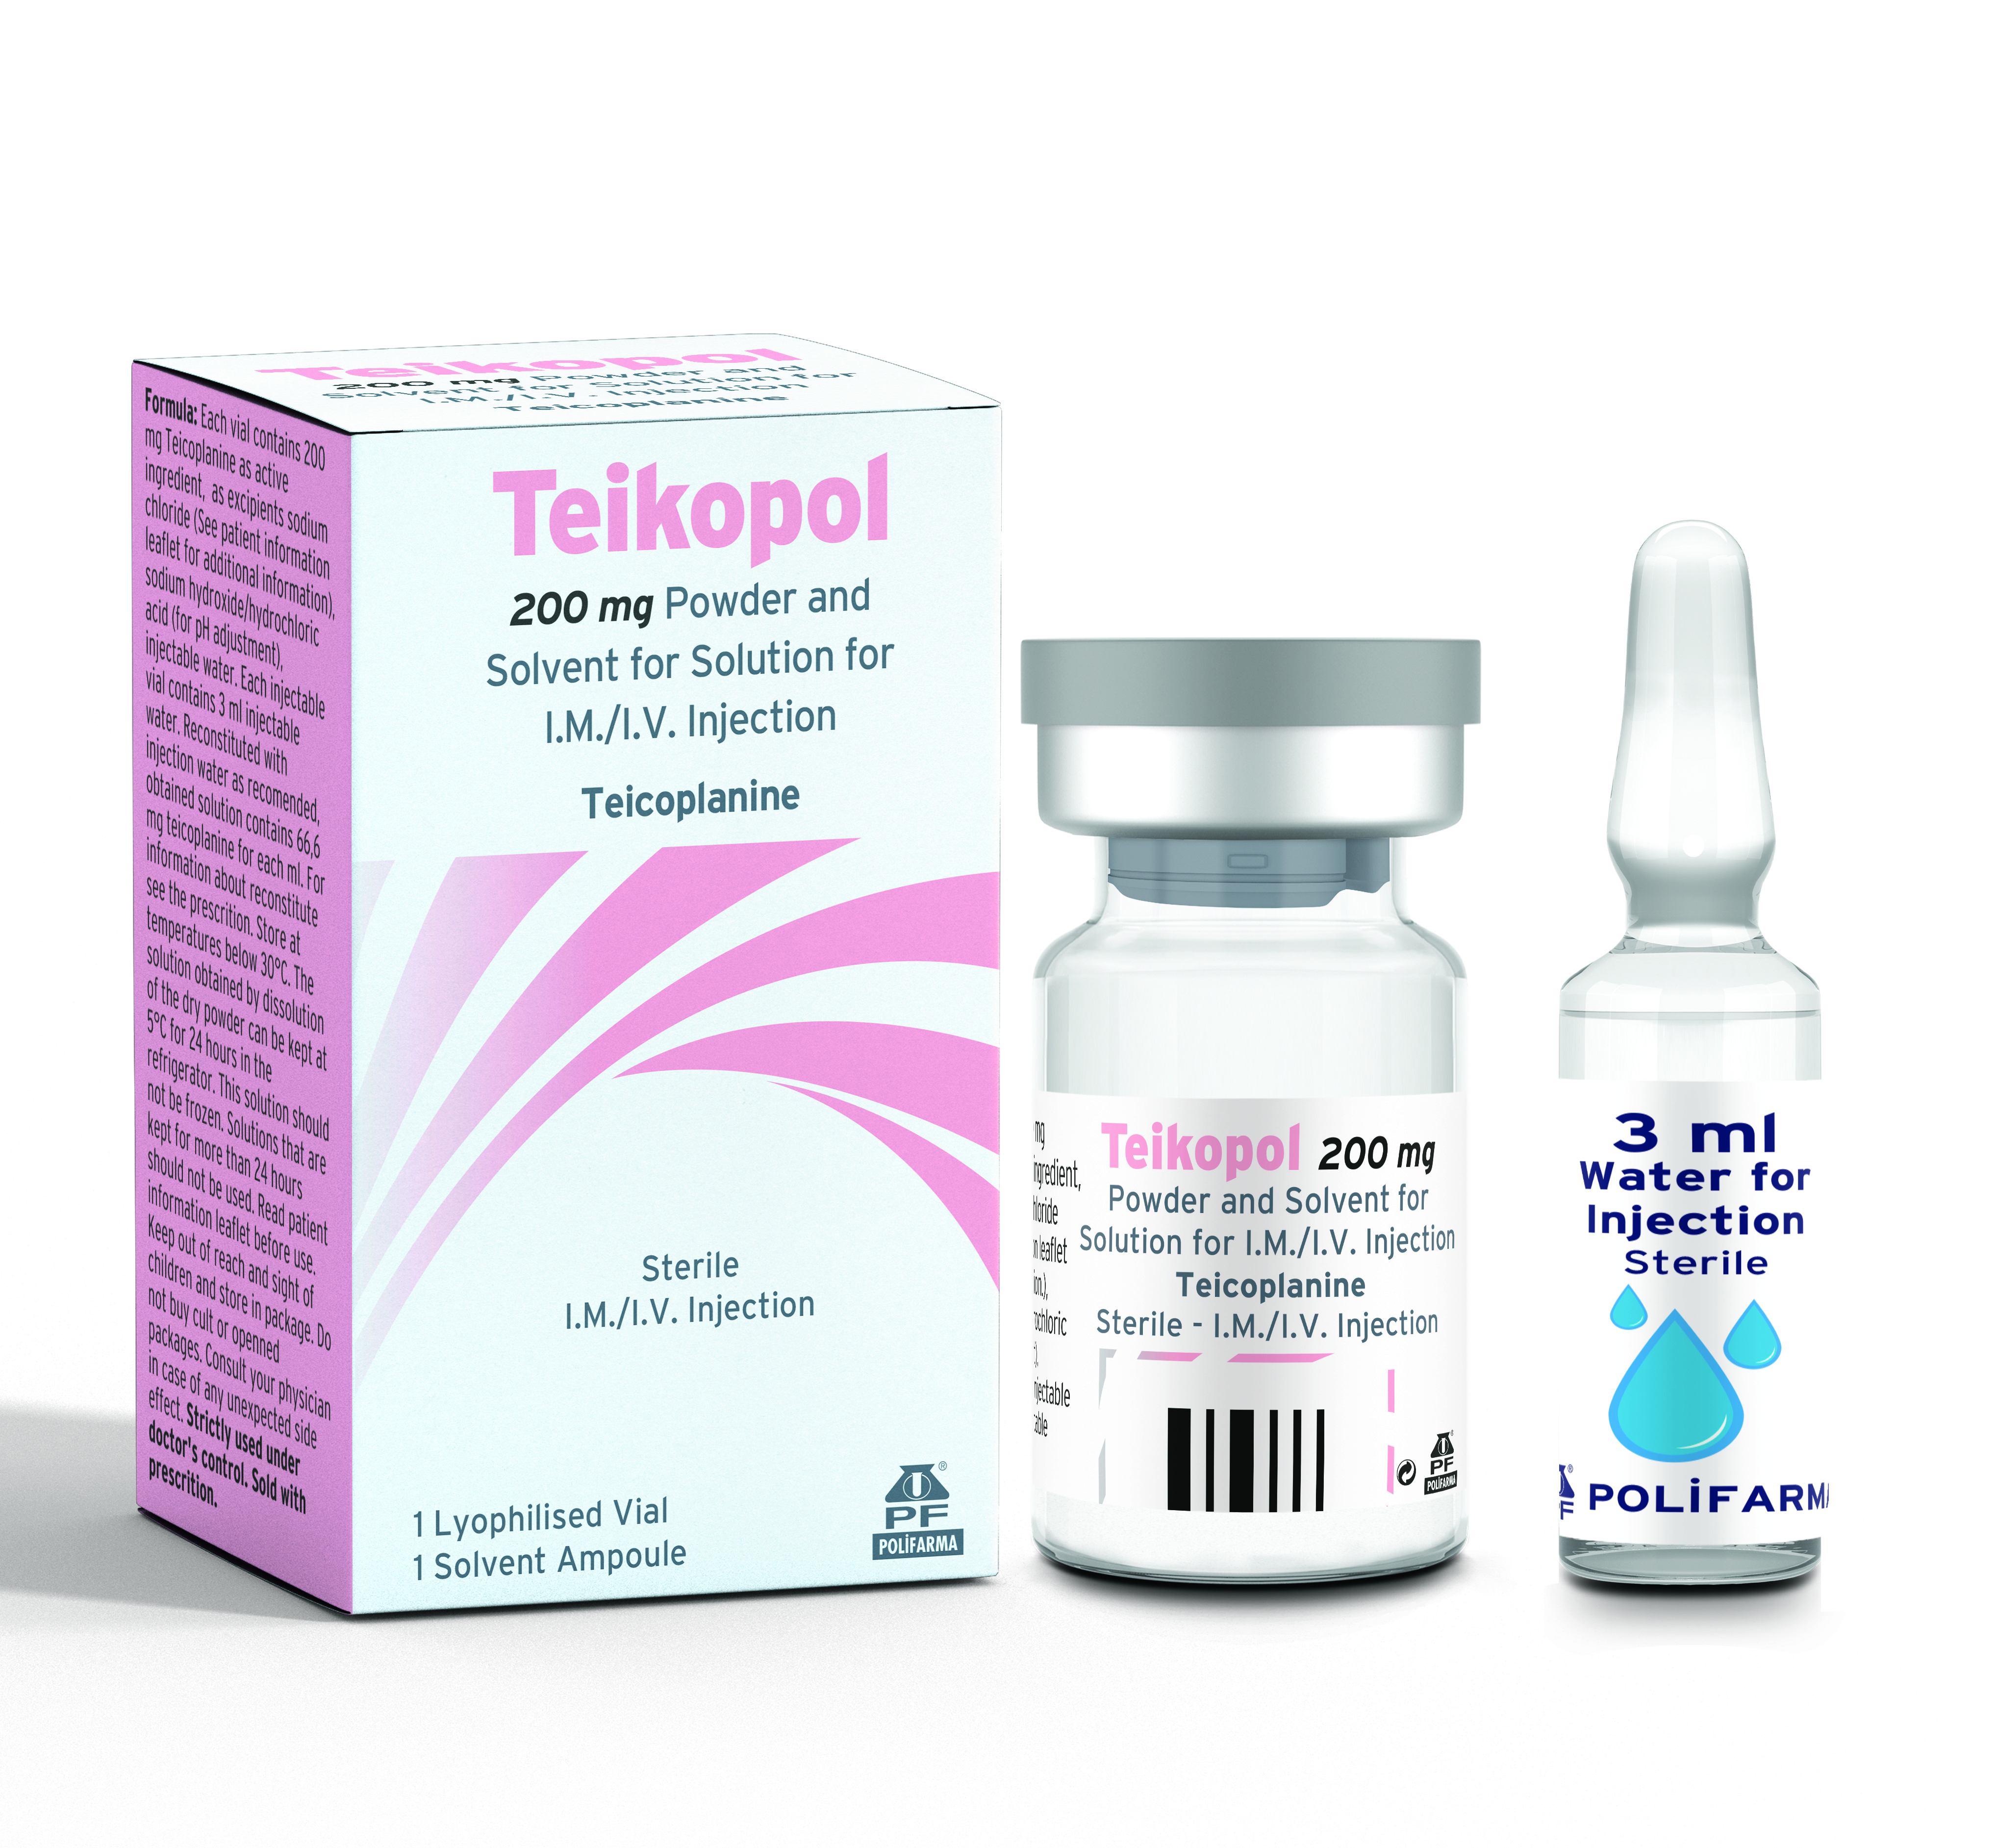 TEİKOPOL 400 mg  I.M./I.V. Powder and solvent for preparation of injectable solution